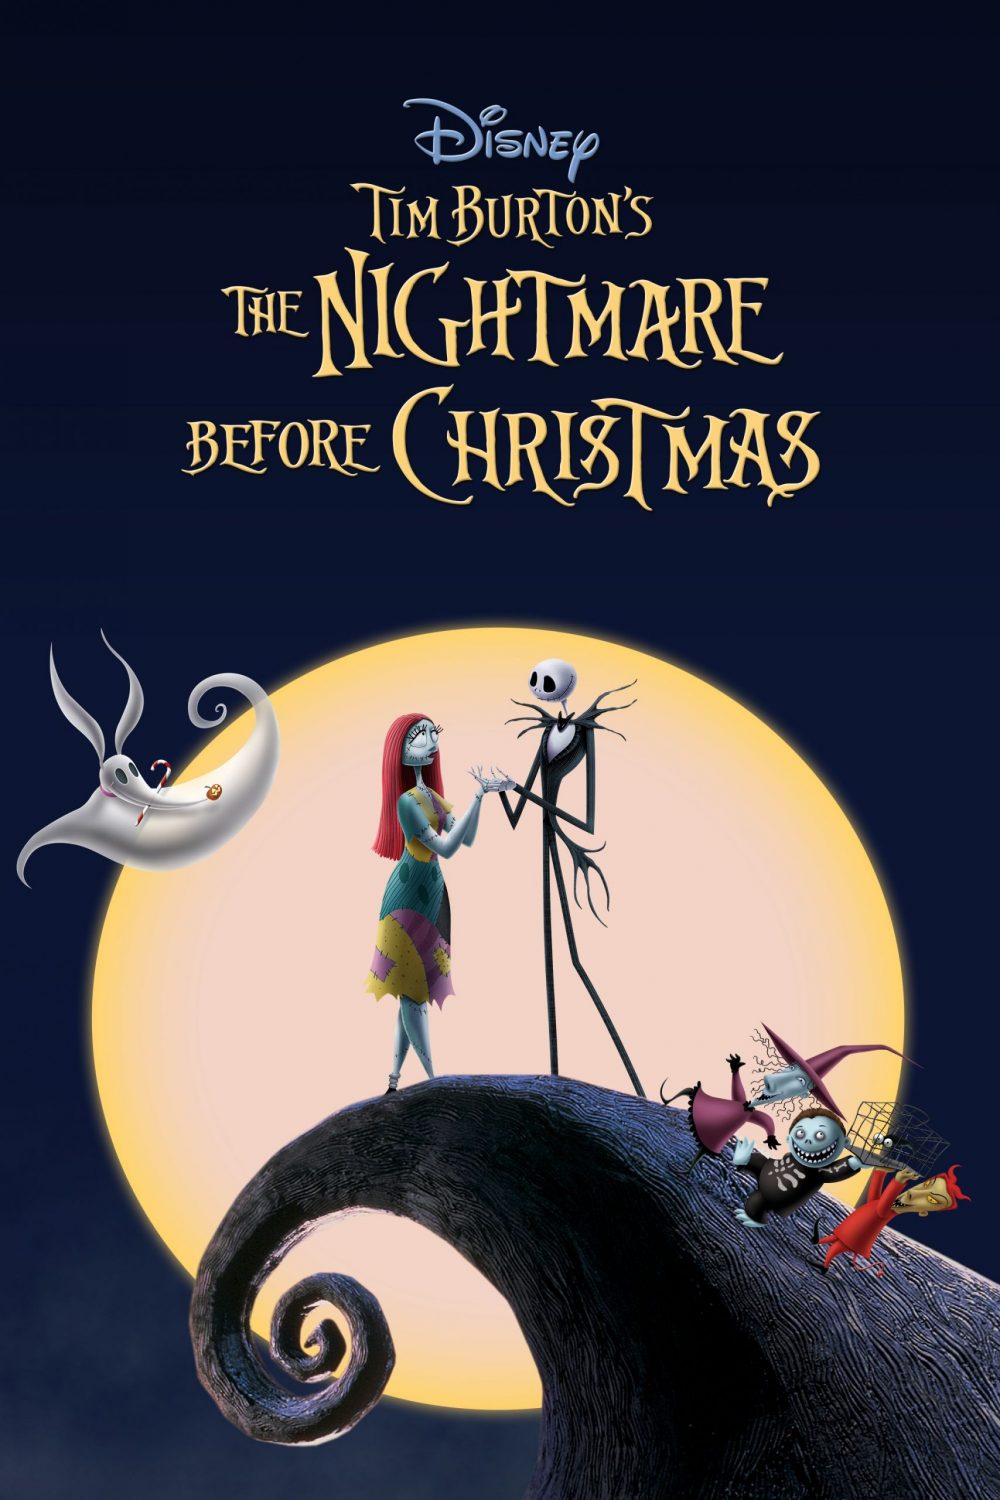 The nightmare before Christmas (1993)